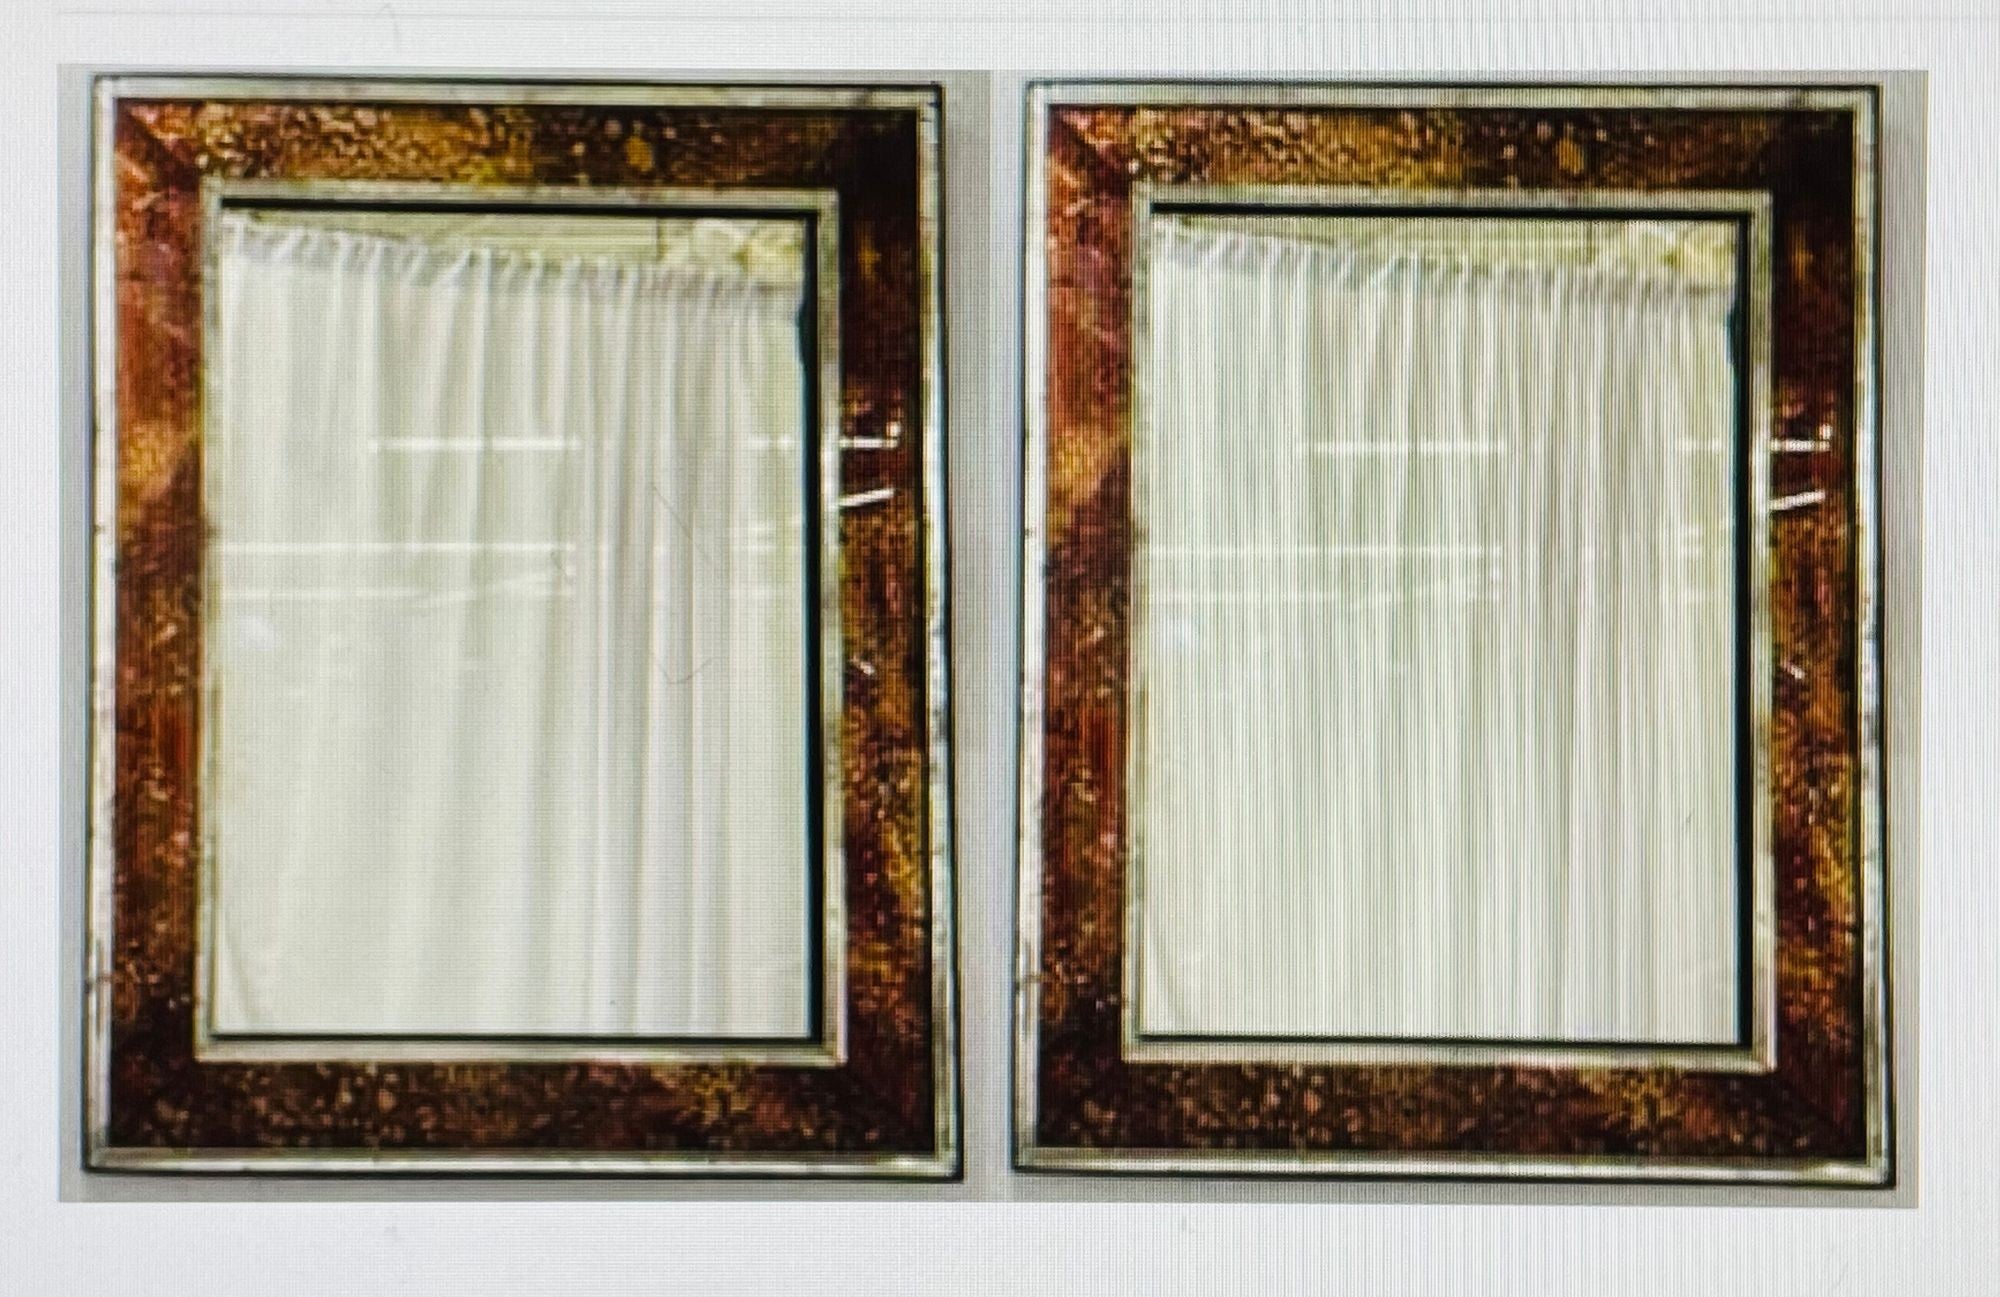 Pair of Hollywood Regency Tortoise Shell Mirrors, Wall, Console Over the Mantle